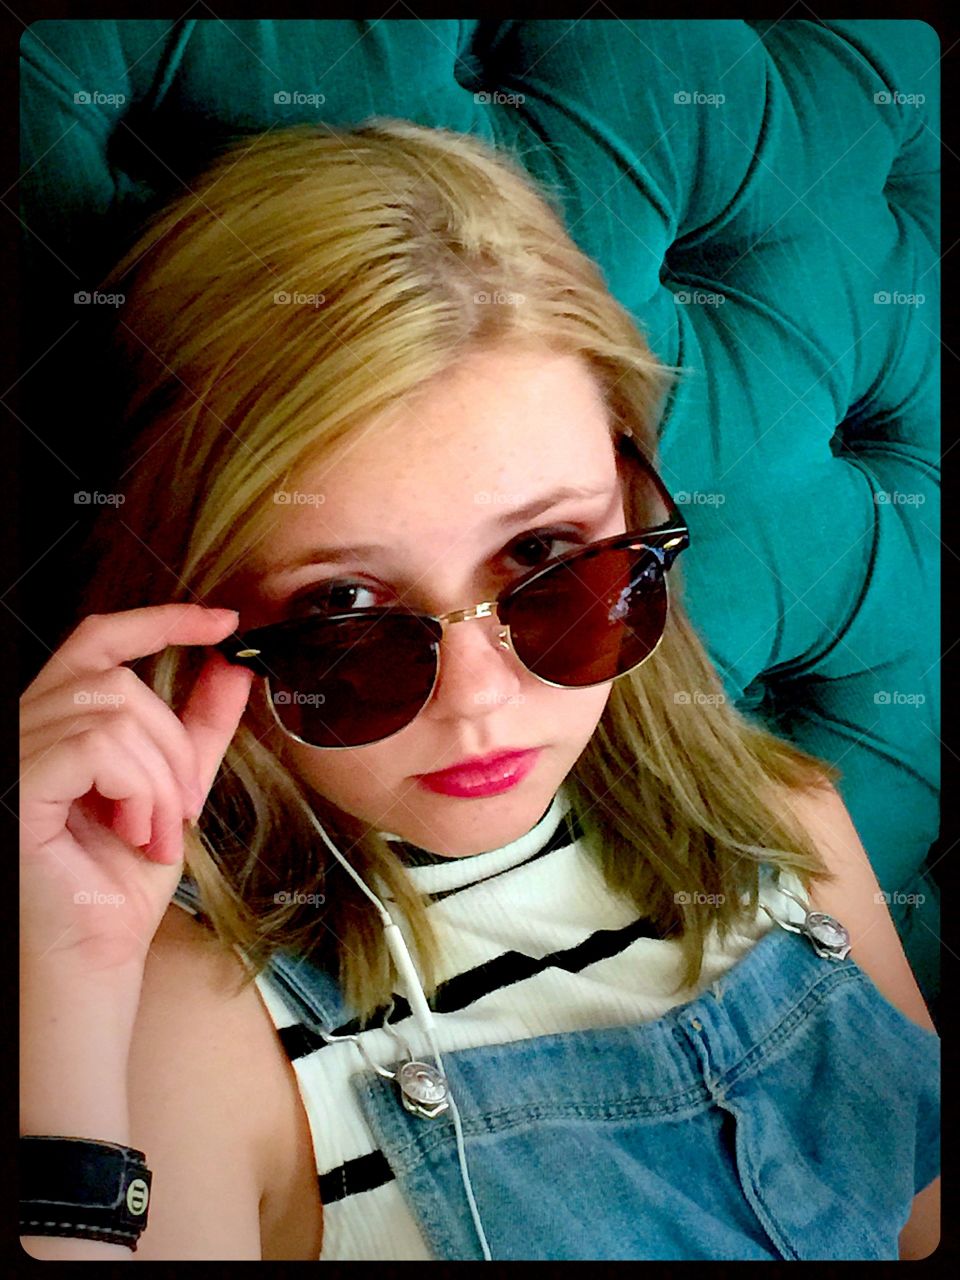 Girl in sunglasses with headphone sitting on sofa